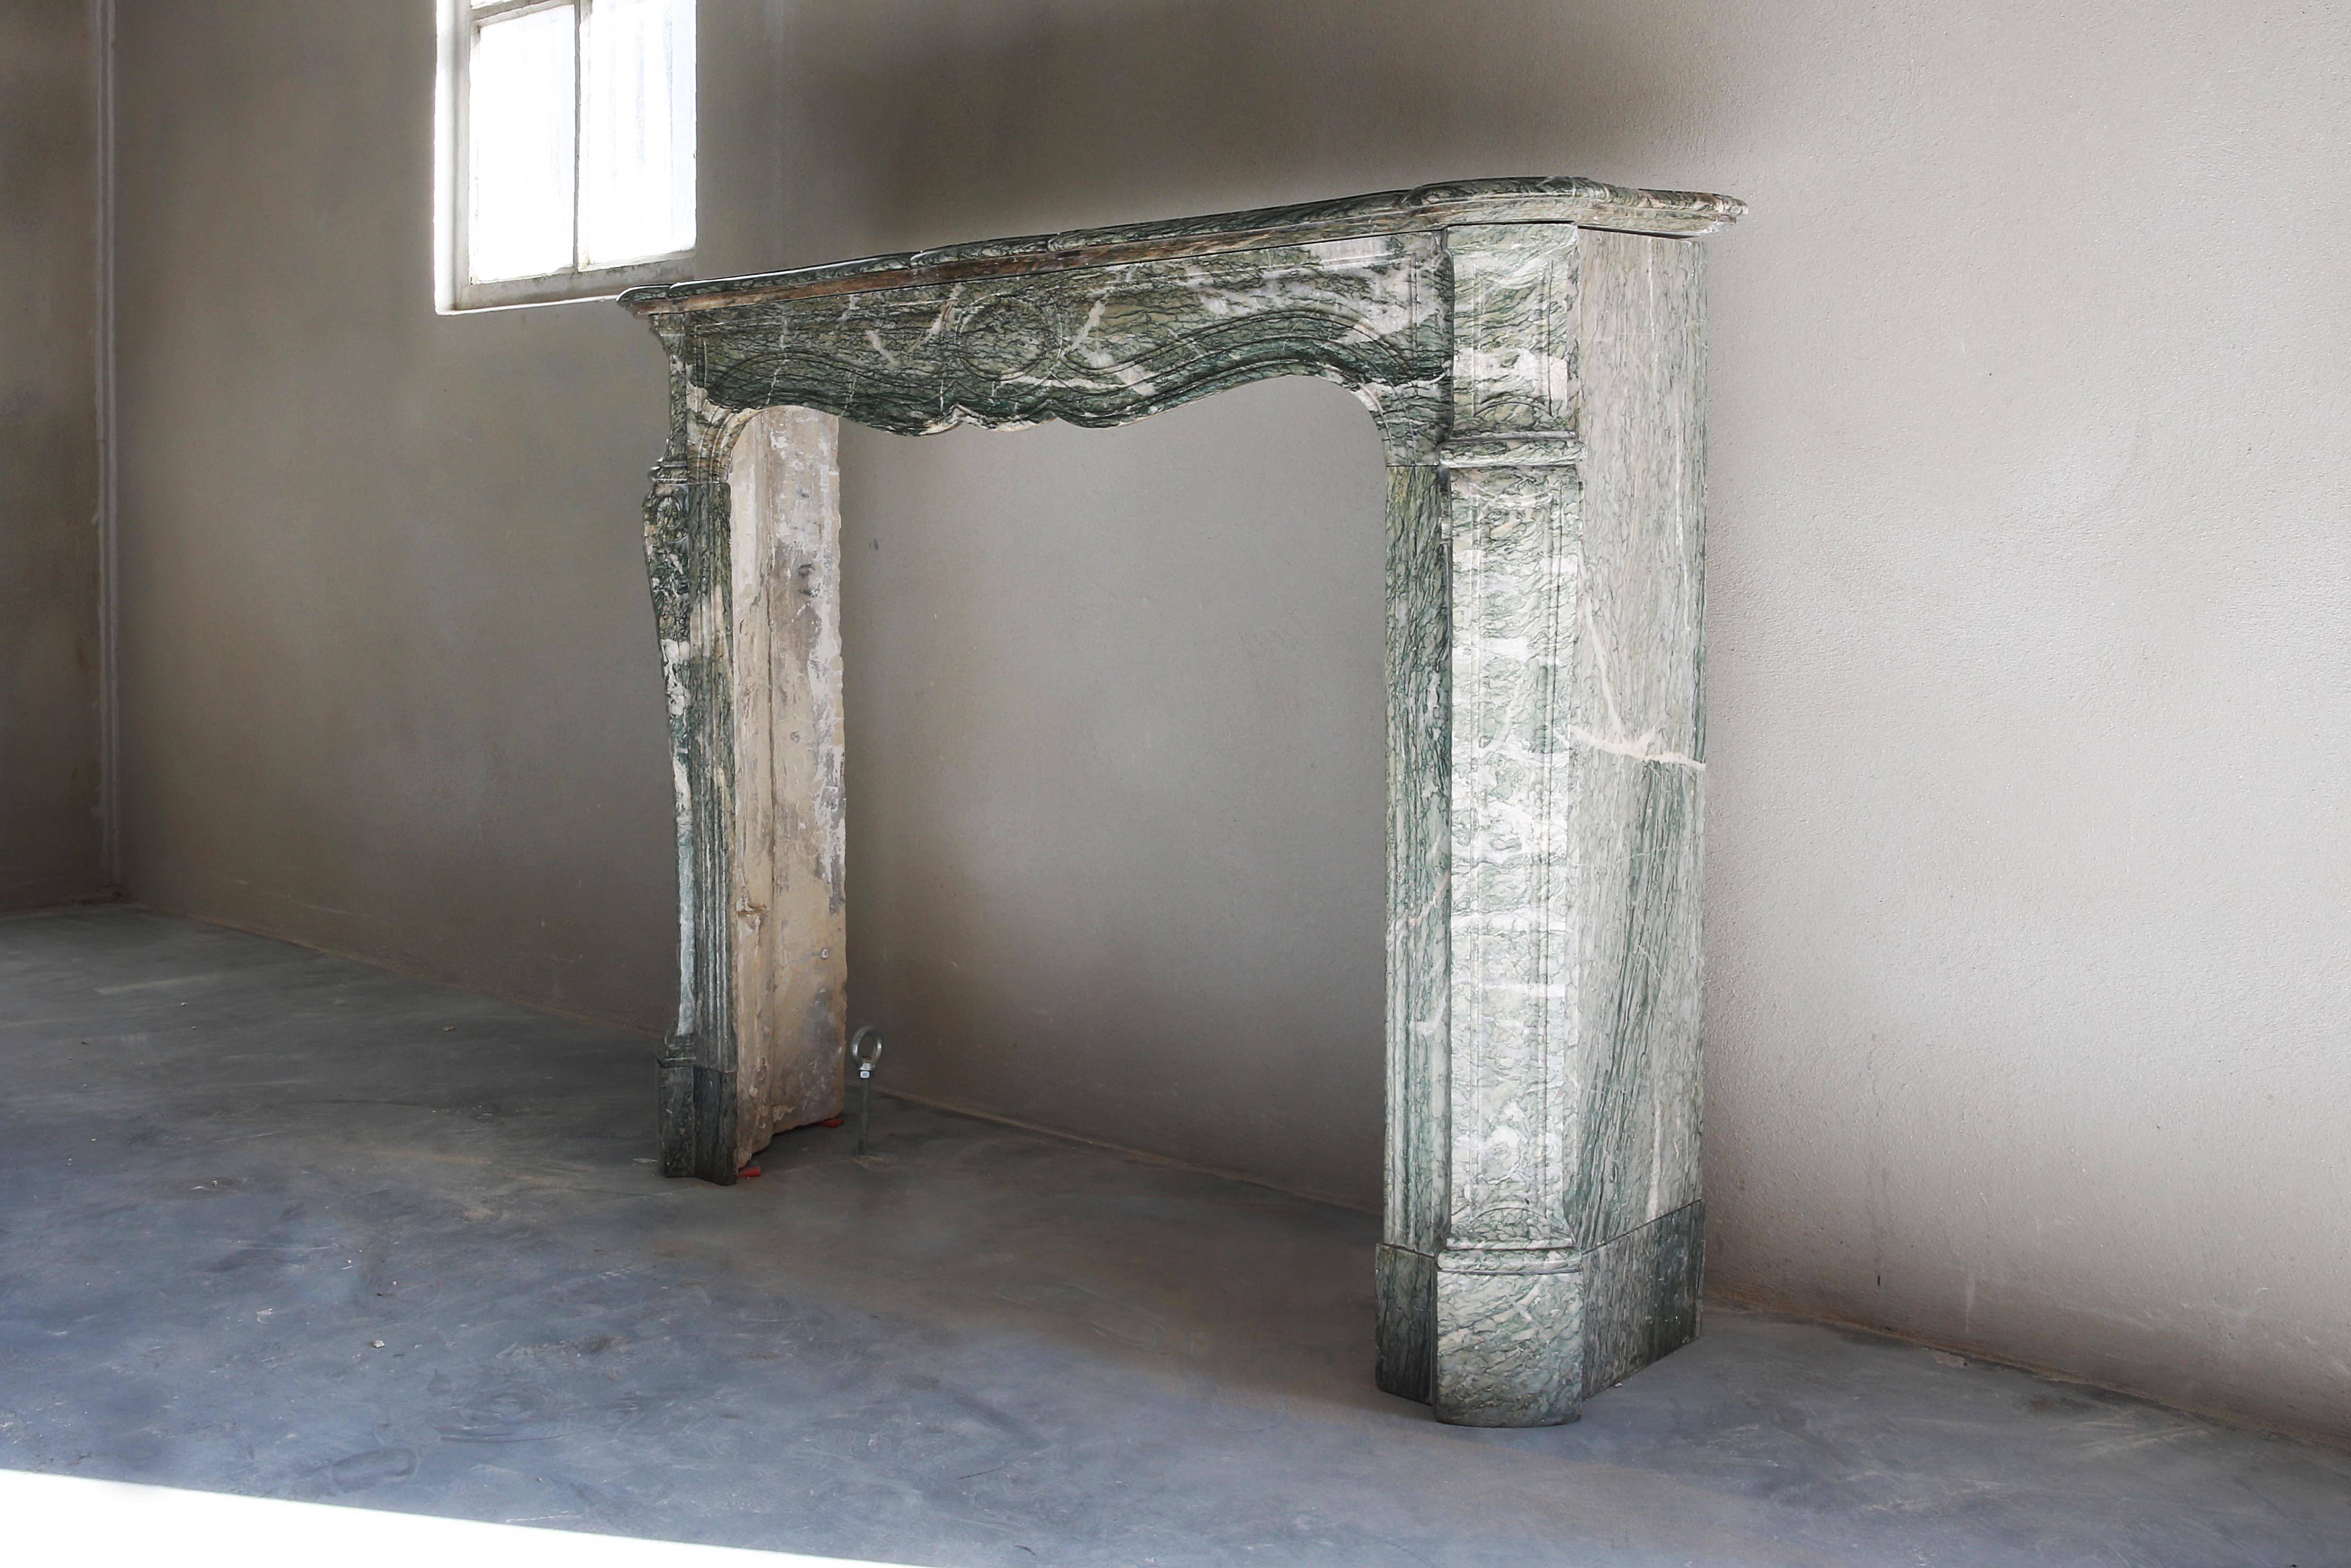 A beautiful and elegant marble fireplace in the style of Pompadour. We found this antique fireplace in Paris.